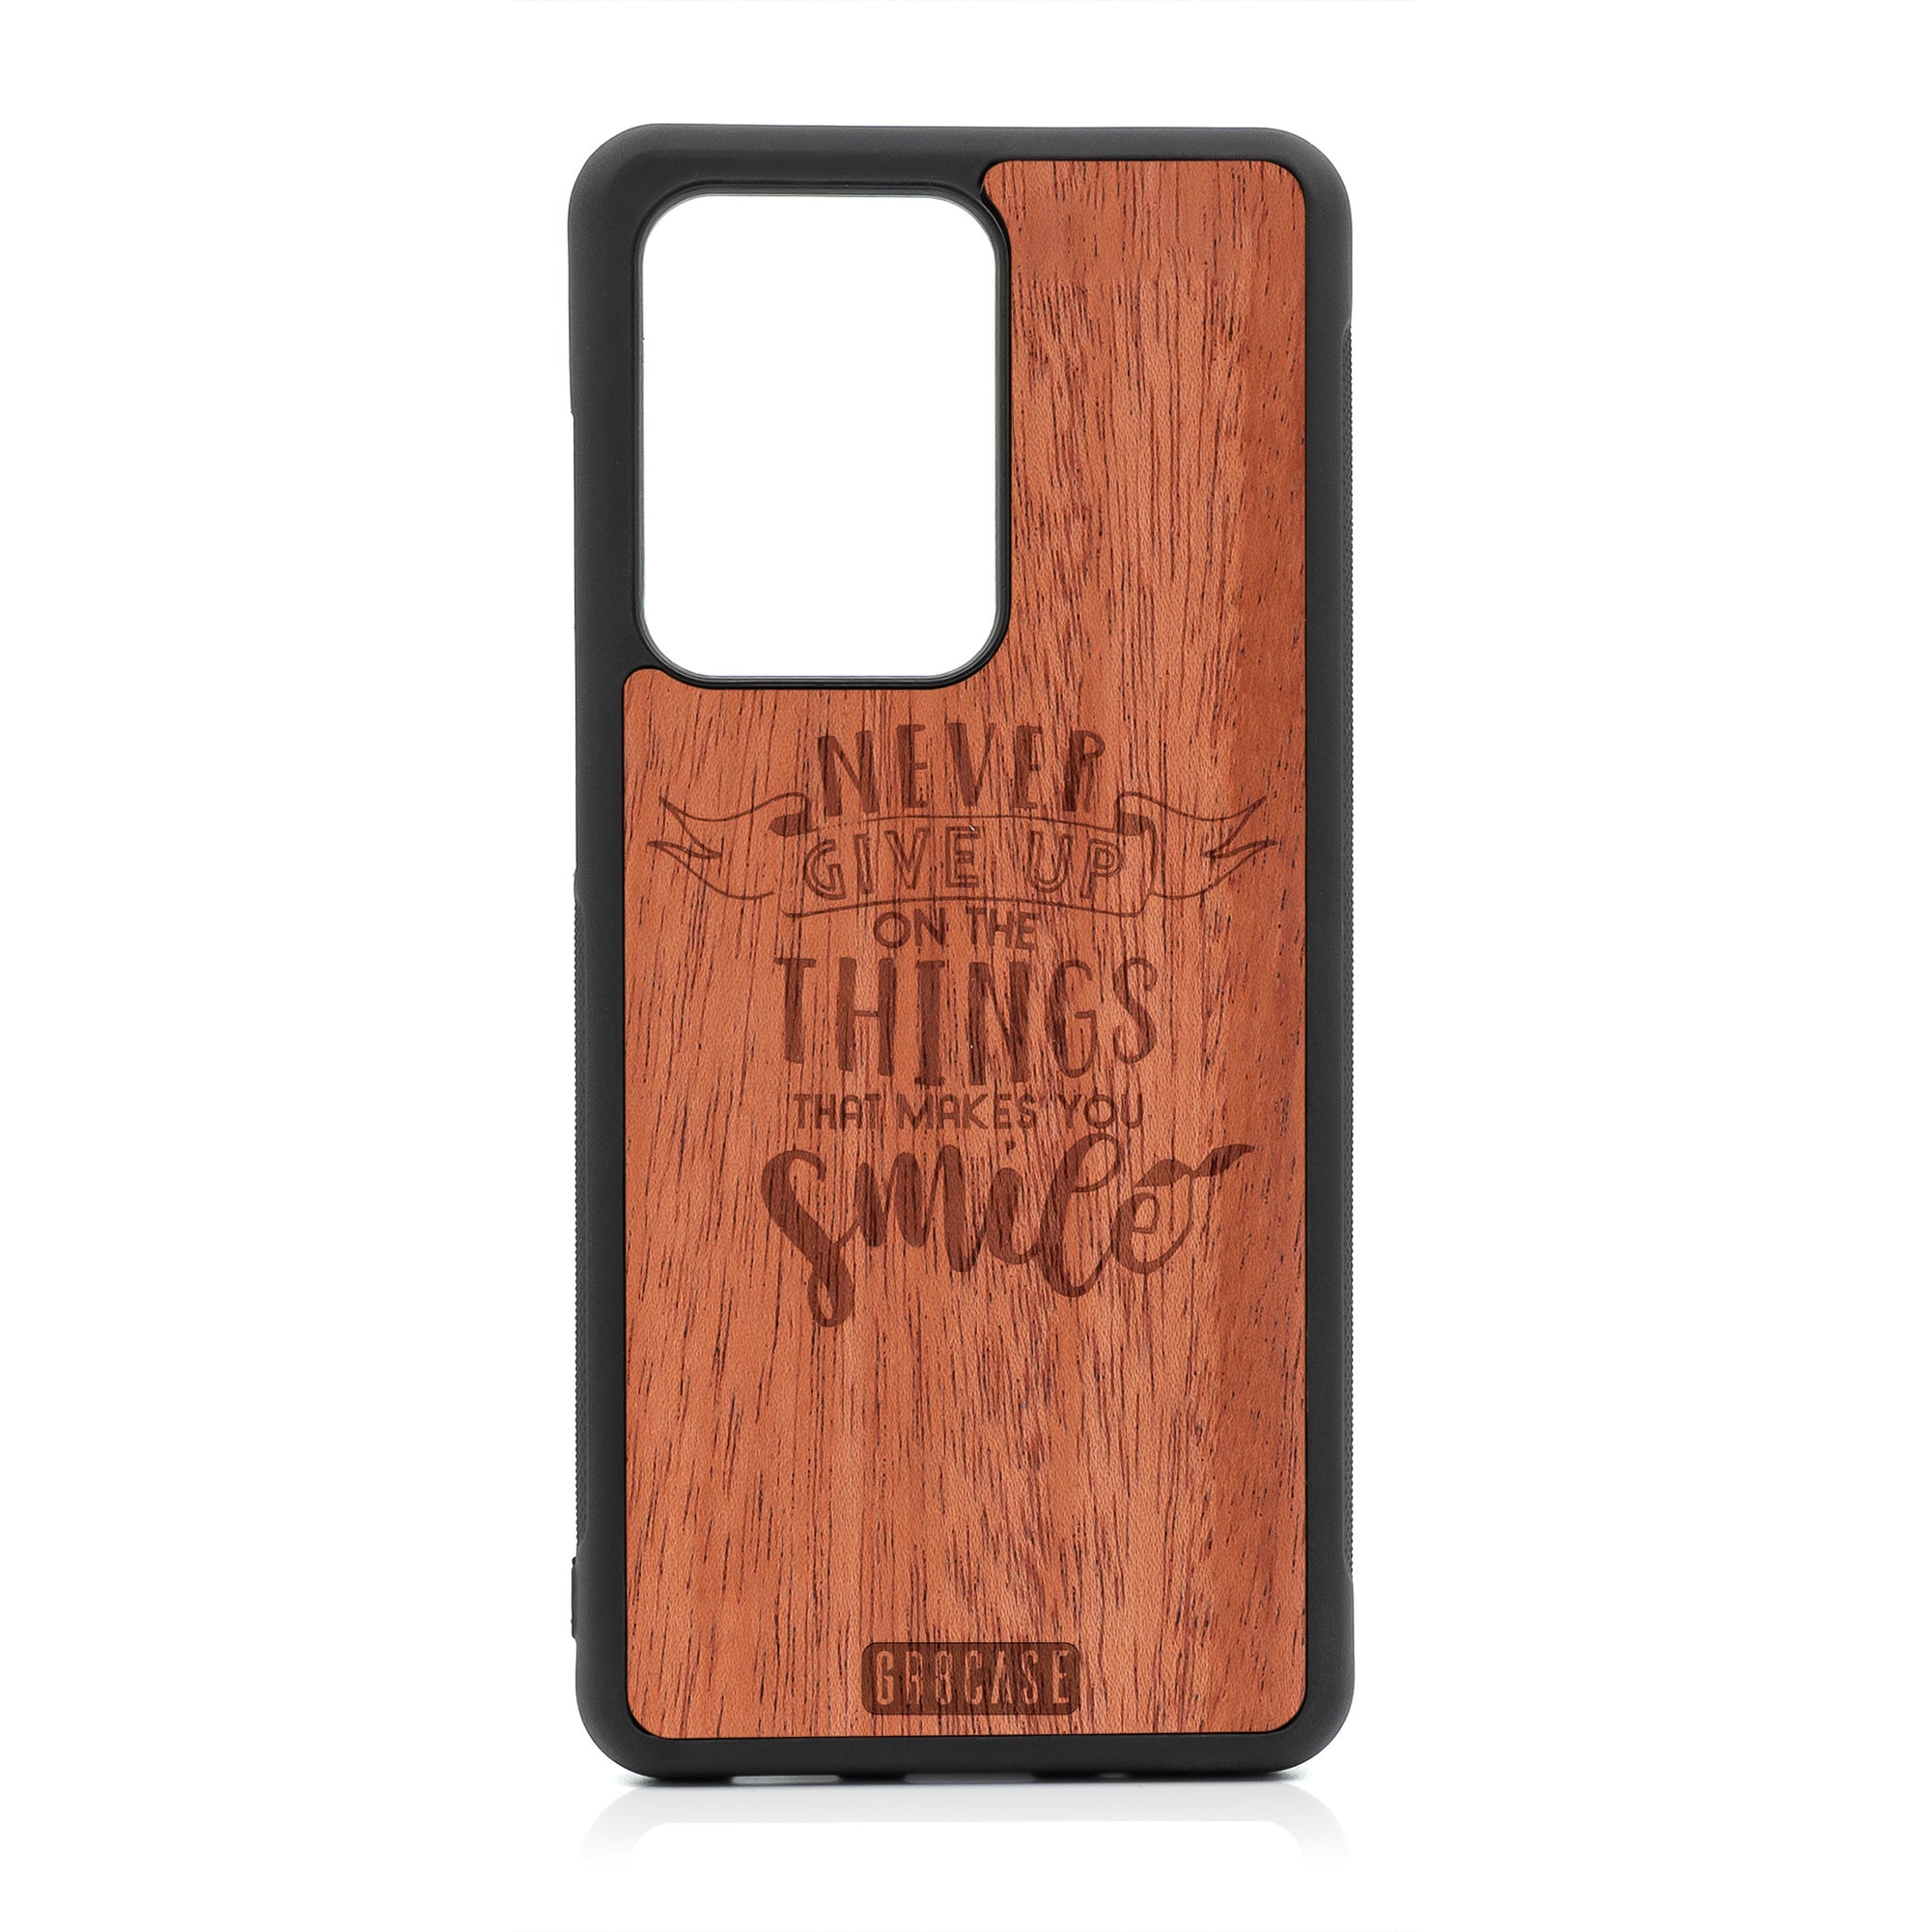 Never Give Up On The Things That Makes You Smile Design Wood Case For Samsung Galaxy S20 Ultra by GR8CASE